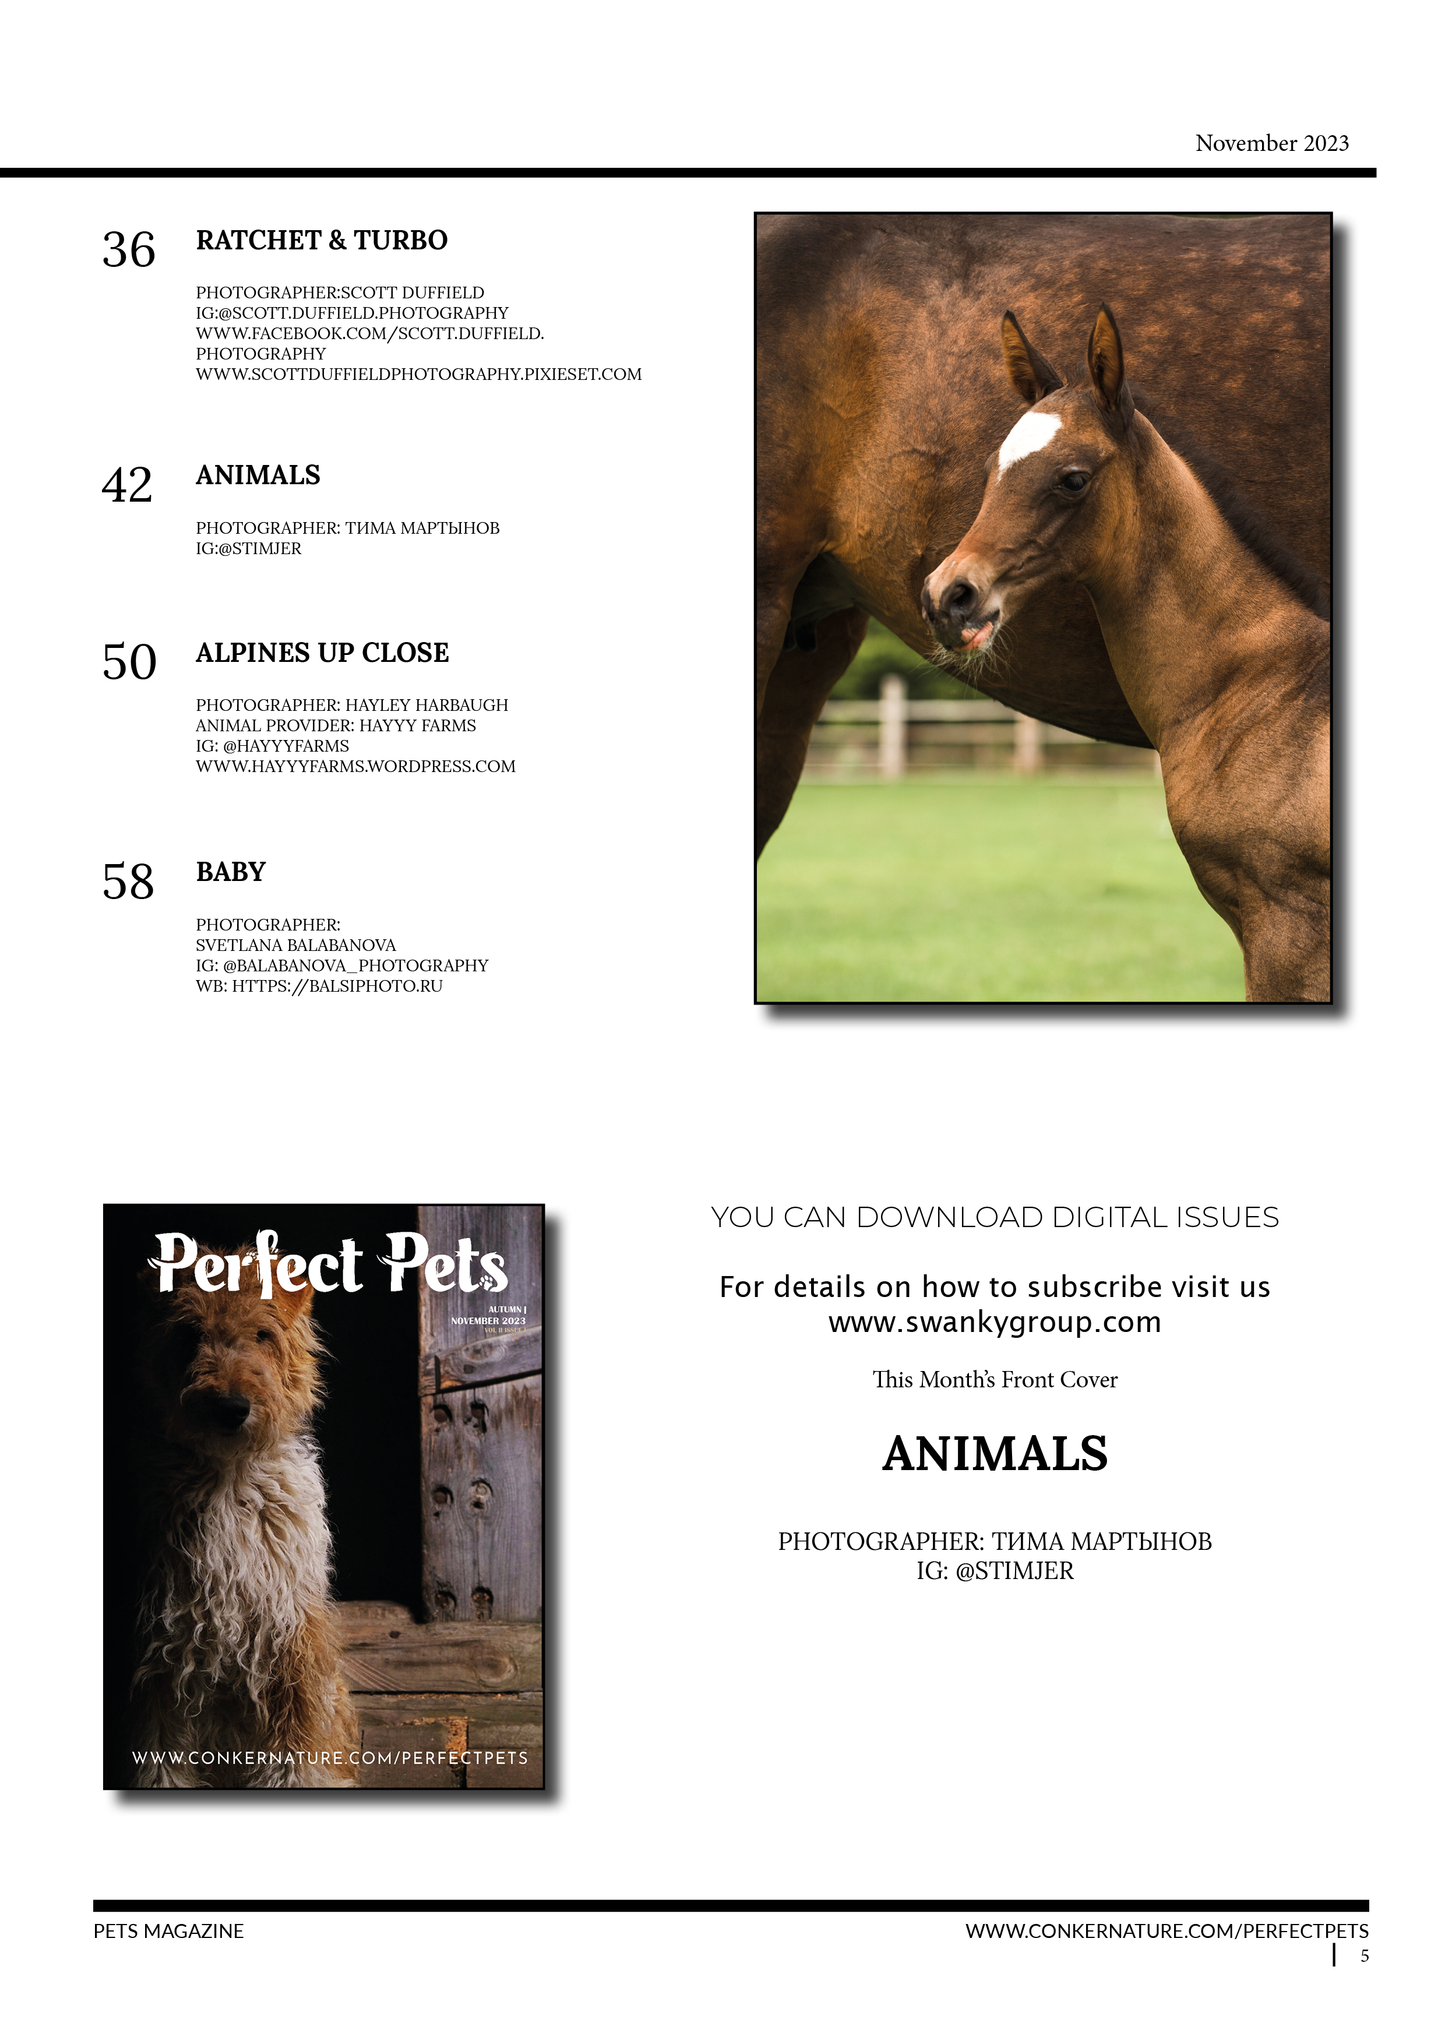 Perfect Pets Magazine | Autumn | The Perfect Pet Pals Issue: November 2023